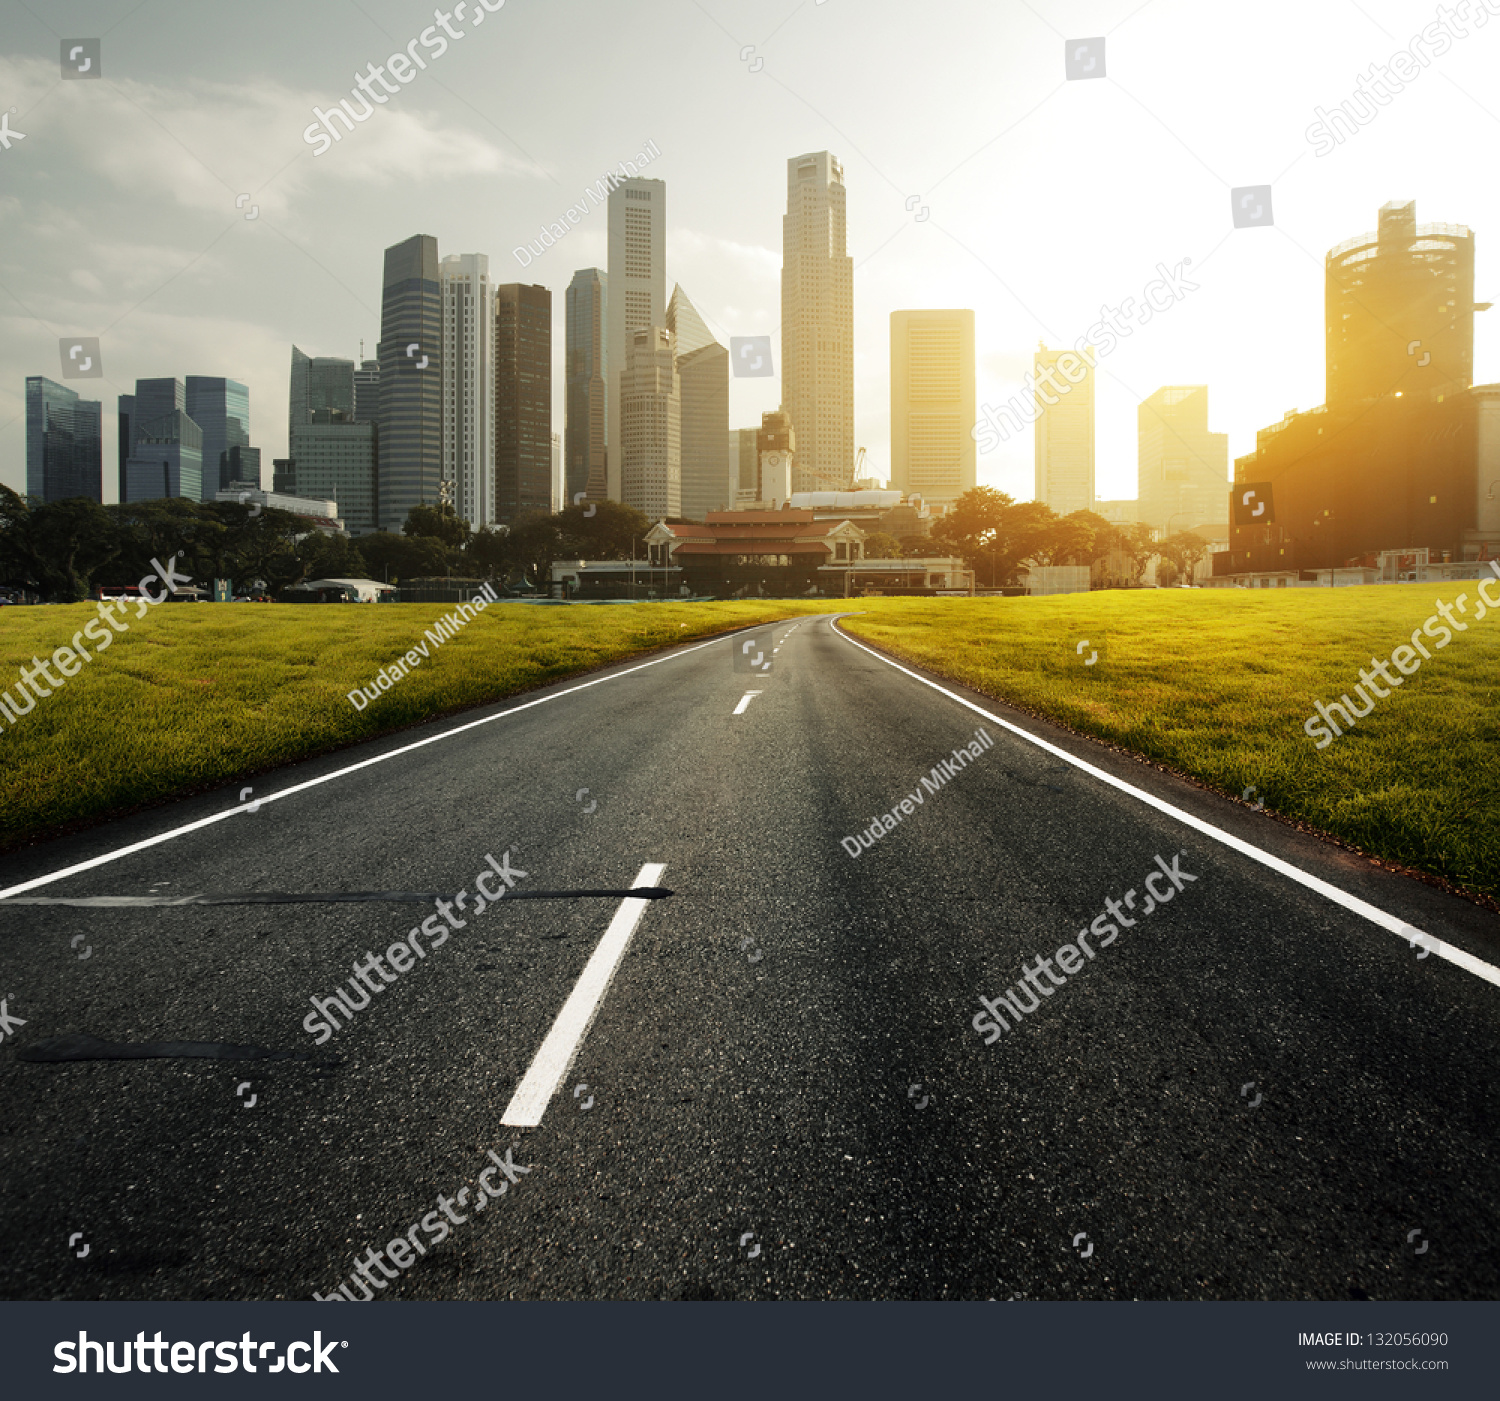 Asphalt road leading to a city with tall buildings through green meadow #132056090